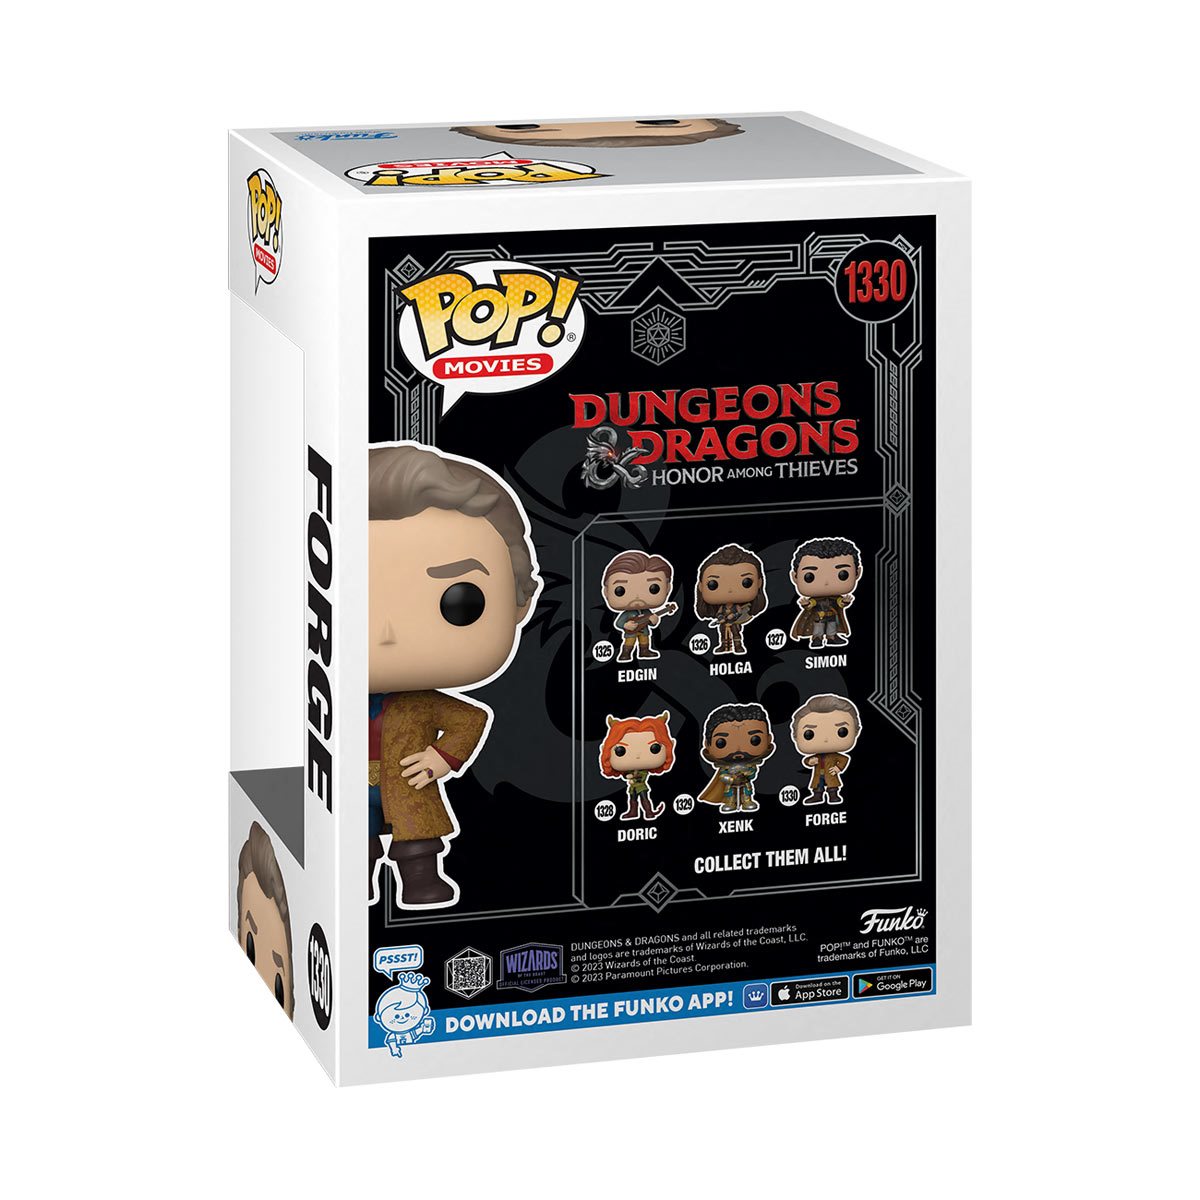 Funko Pop Movies: Dungeons And Dragons - Forge